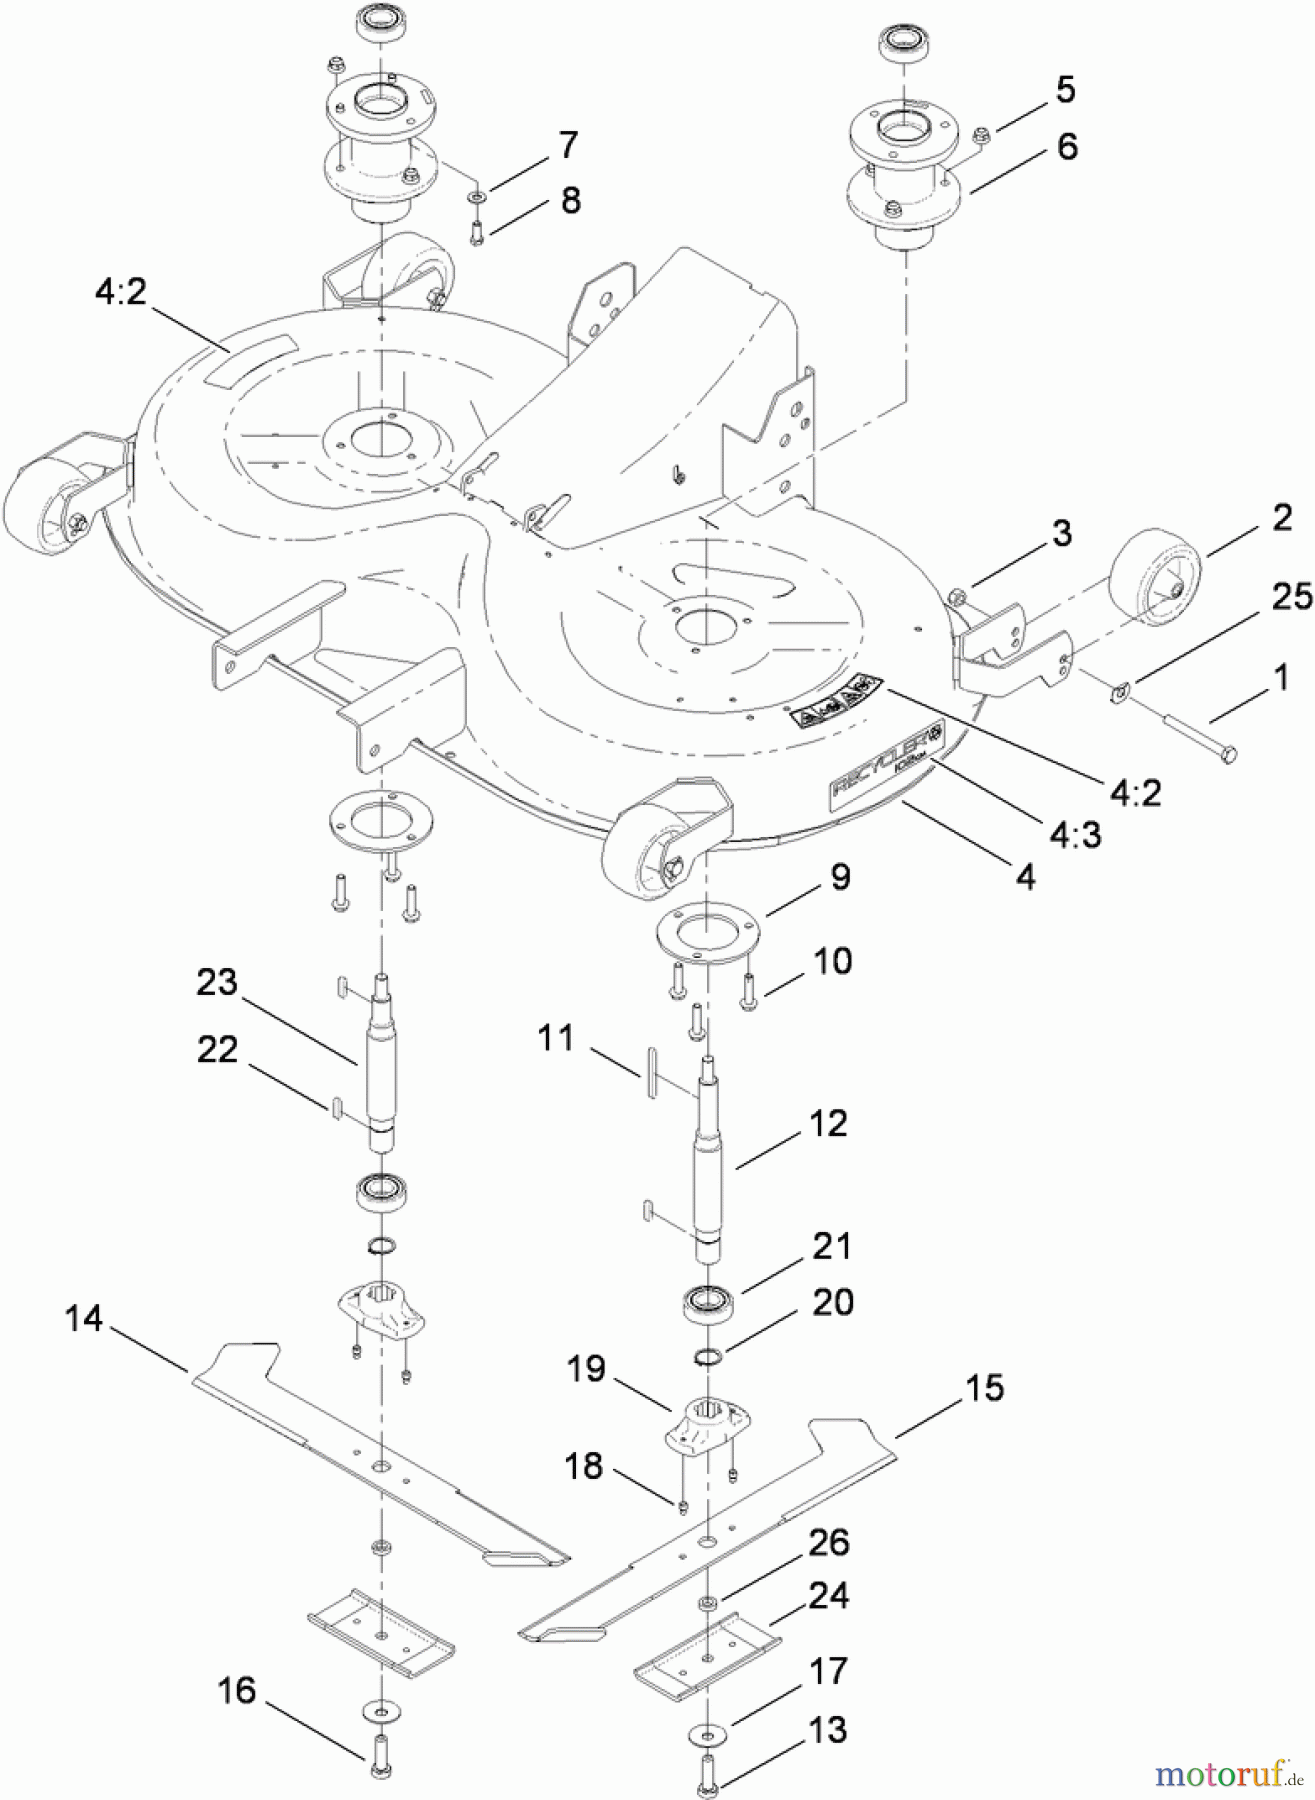  Toro Neu Mowers, Lawn & Garden Tractor Seite 1 74582 (DH 210) - Toro DH 210 Lawn Tractor, 2010 (310000001-310999999) CUTTING PAN AND MOWER HOUSING ASSEMBLY